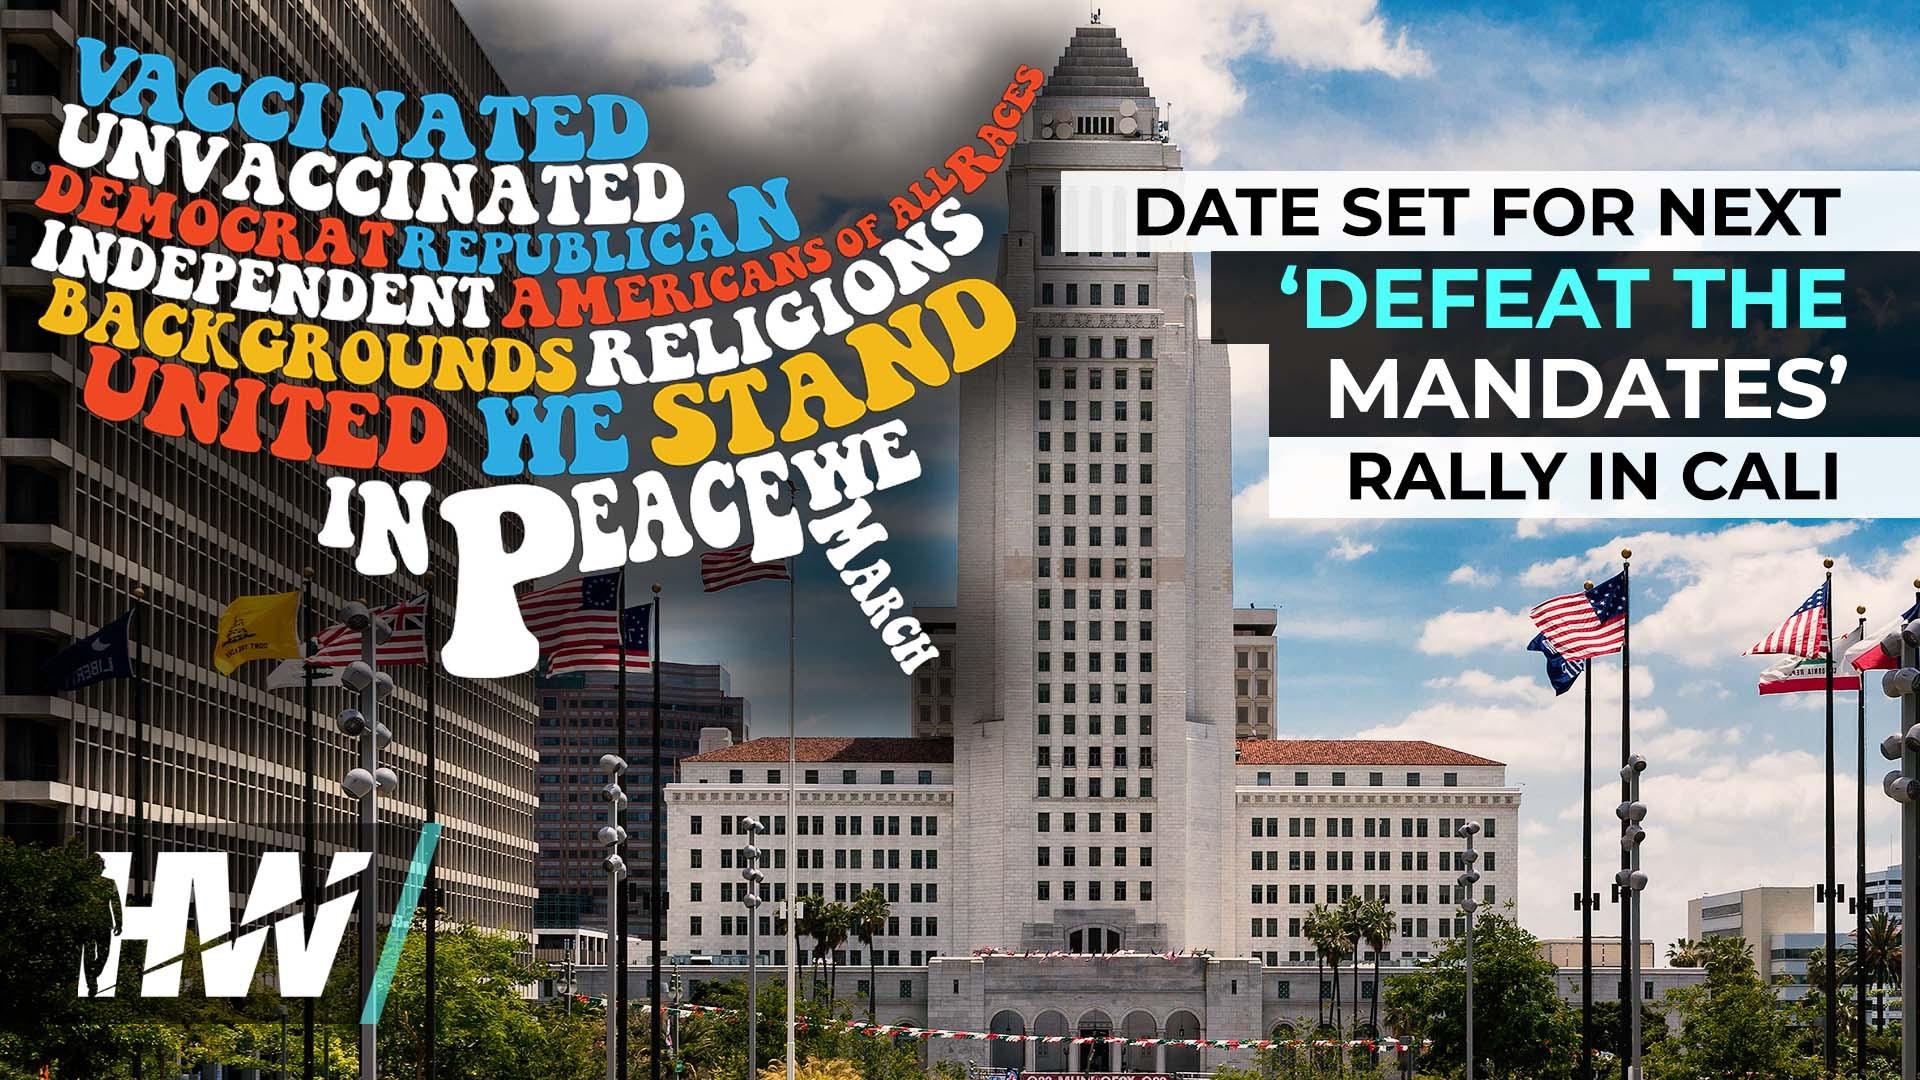 DATE SET FOR NEXT 'Defeat The Mandates' Rally IN CALI